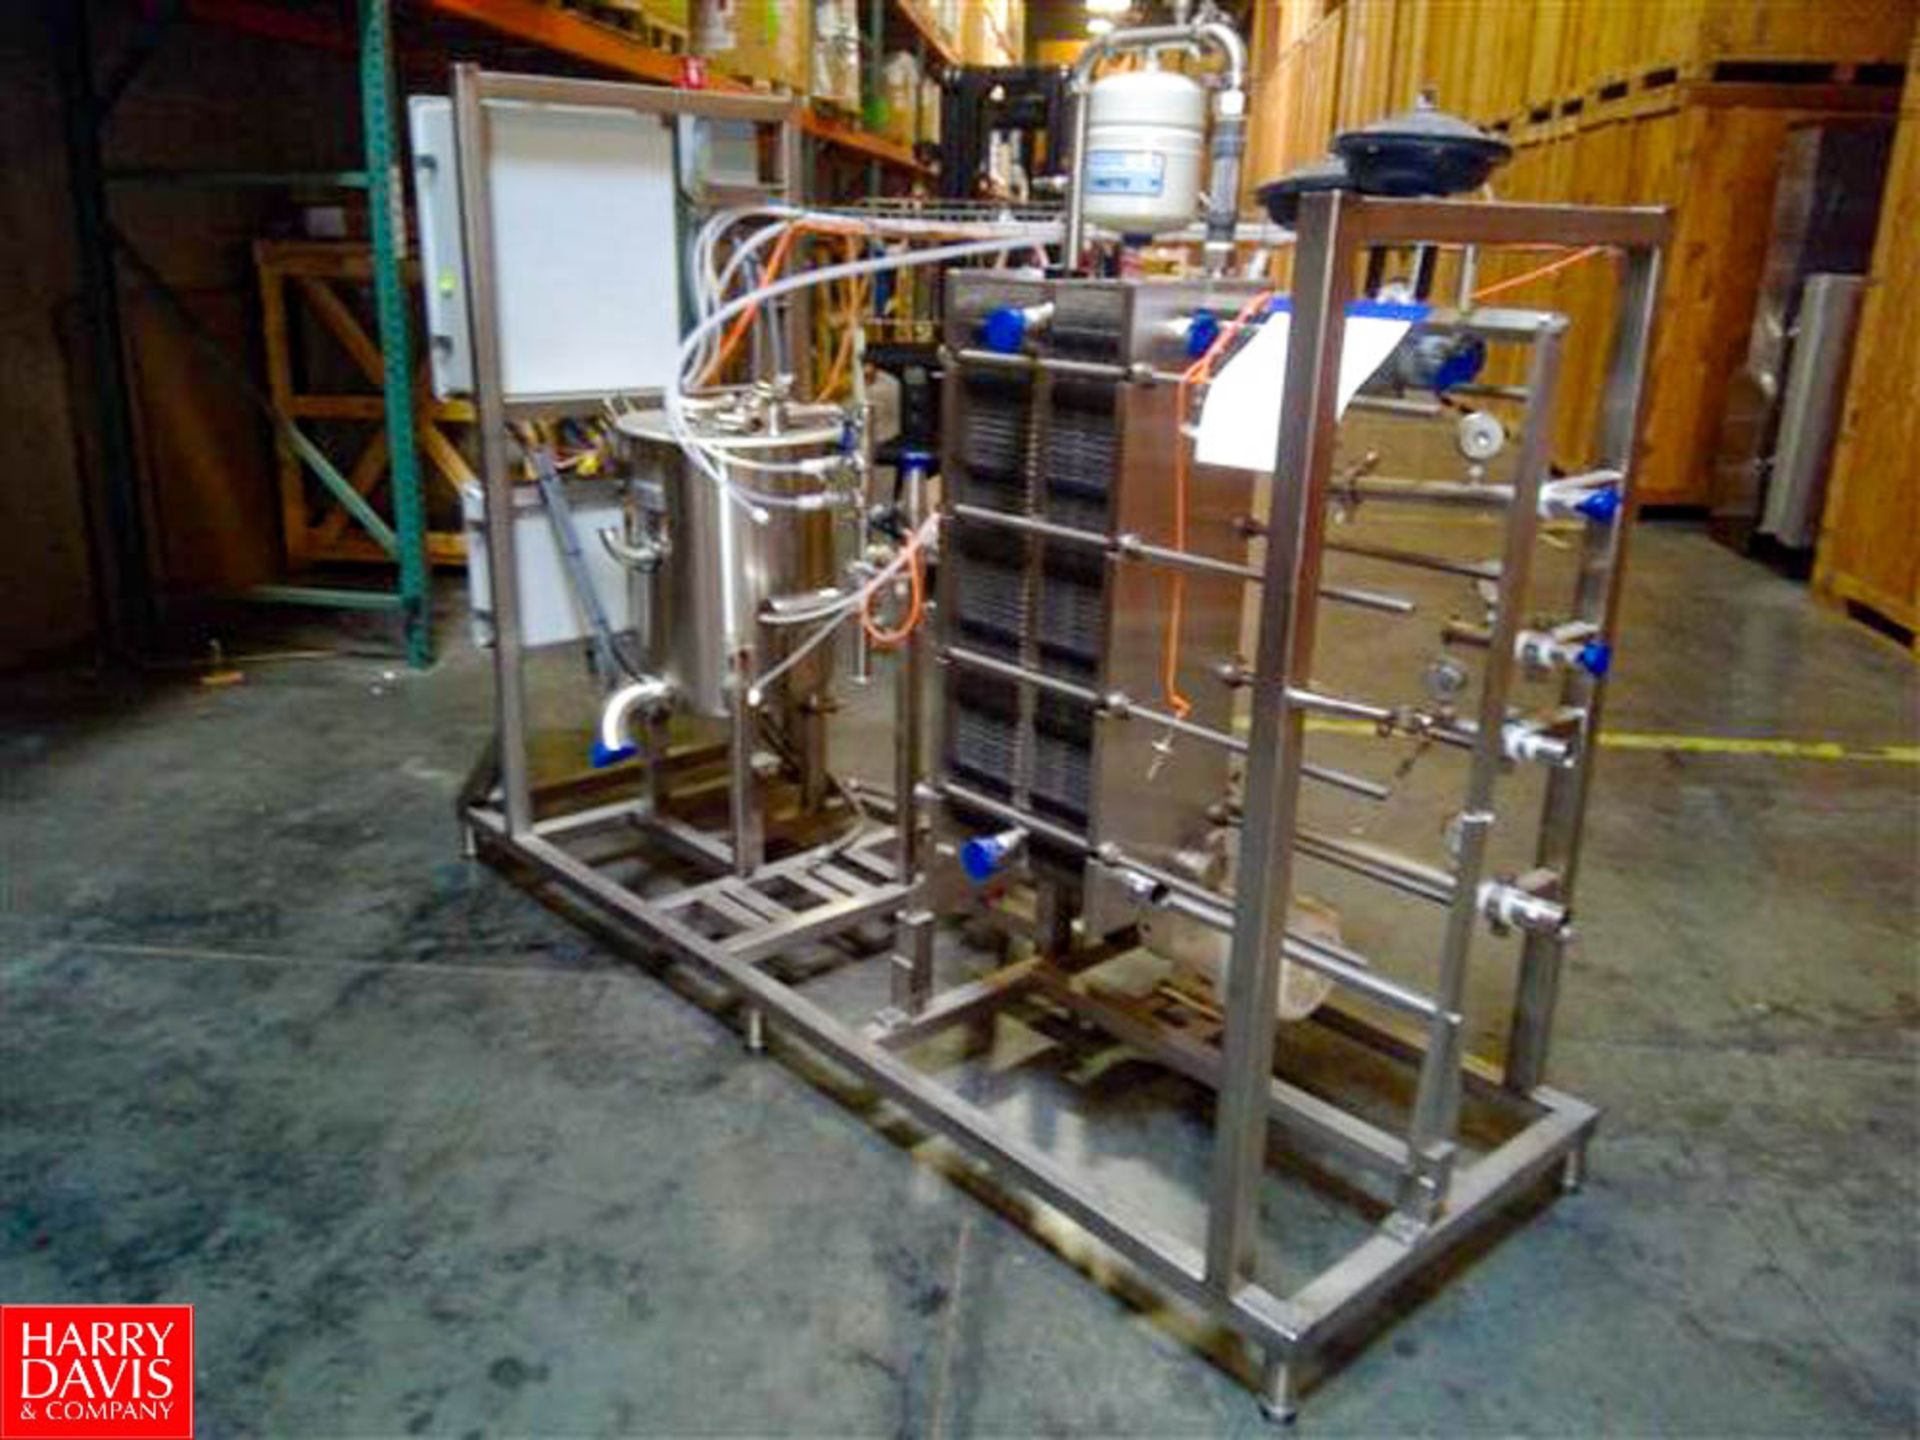 NEW Sondex Thermaline 10 GPM Pasteurization Skid Including S/S Frame Plate Heat Exchanger, S/S